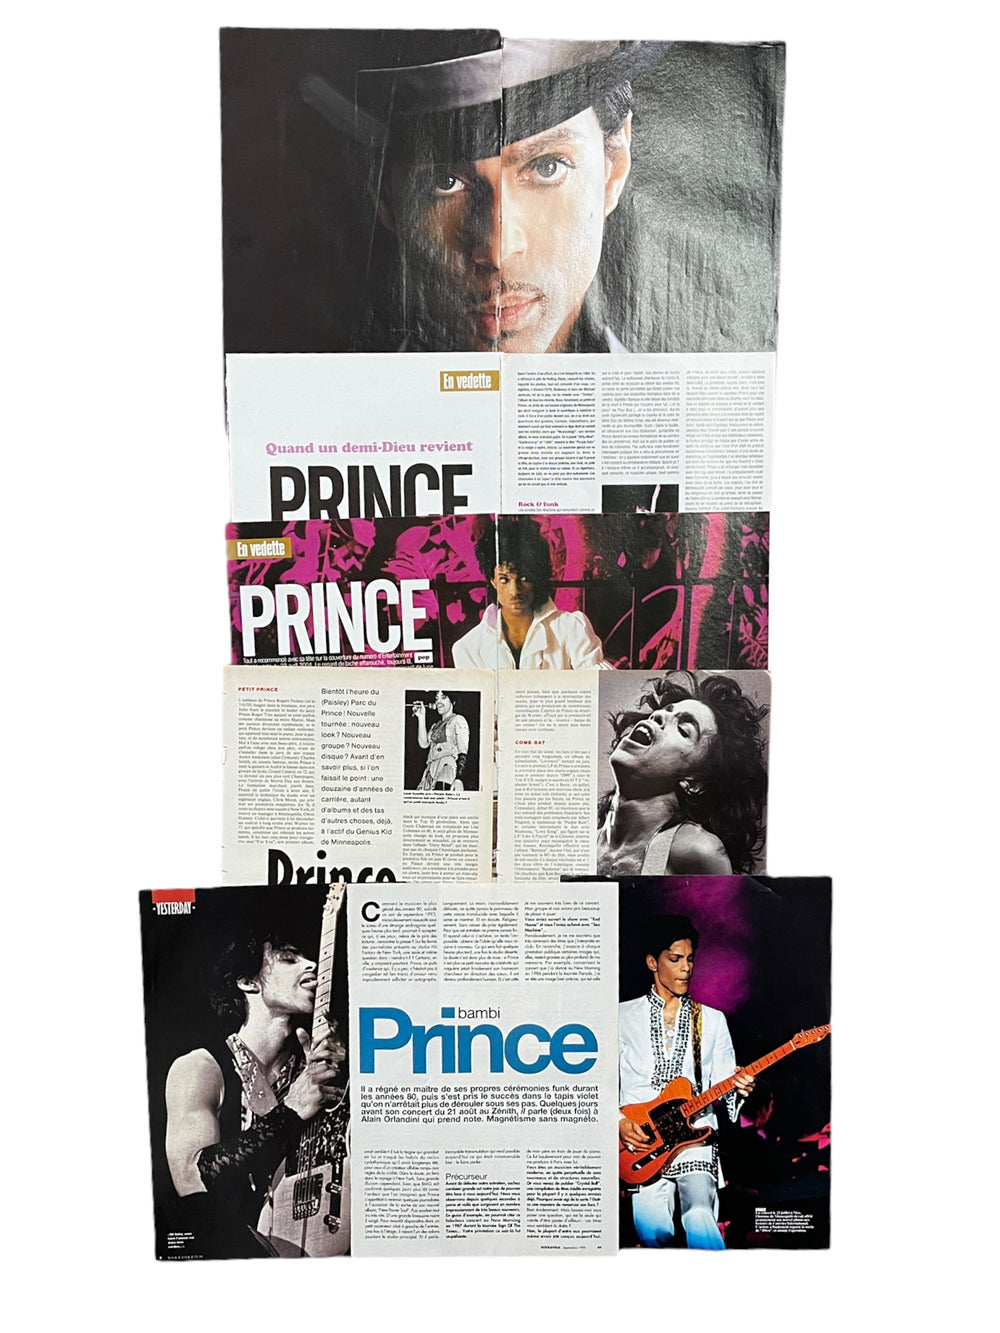 Prince – Cuttings Pack Selection #1